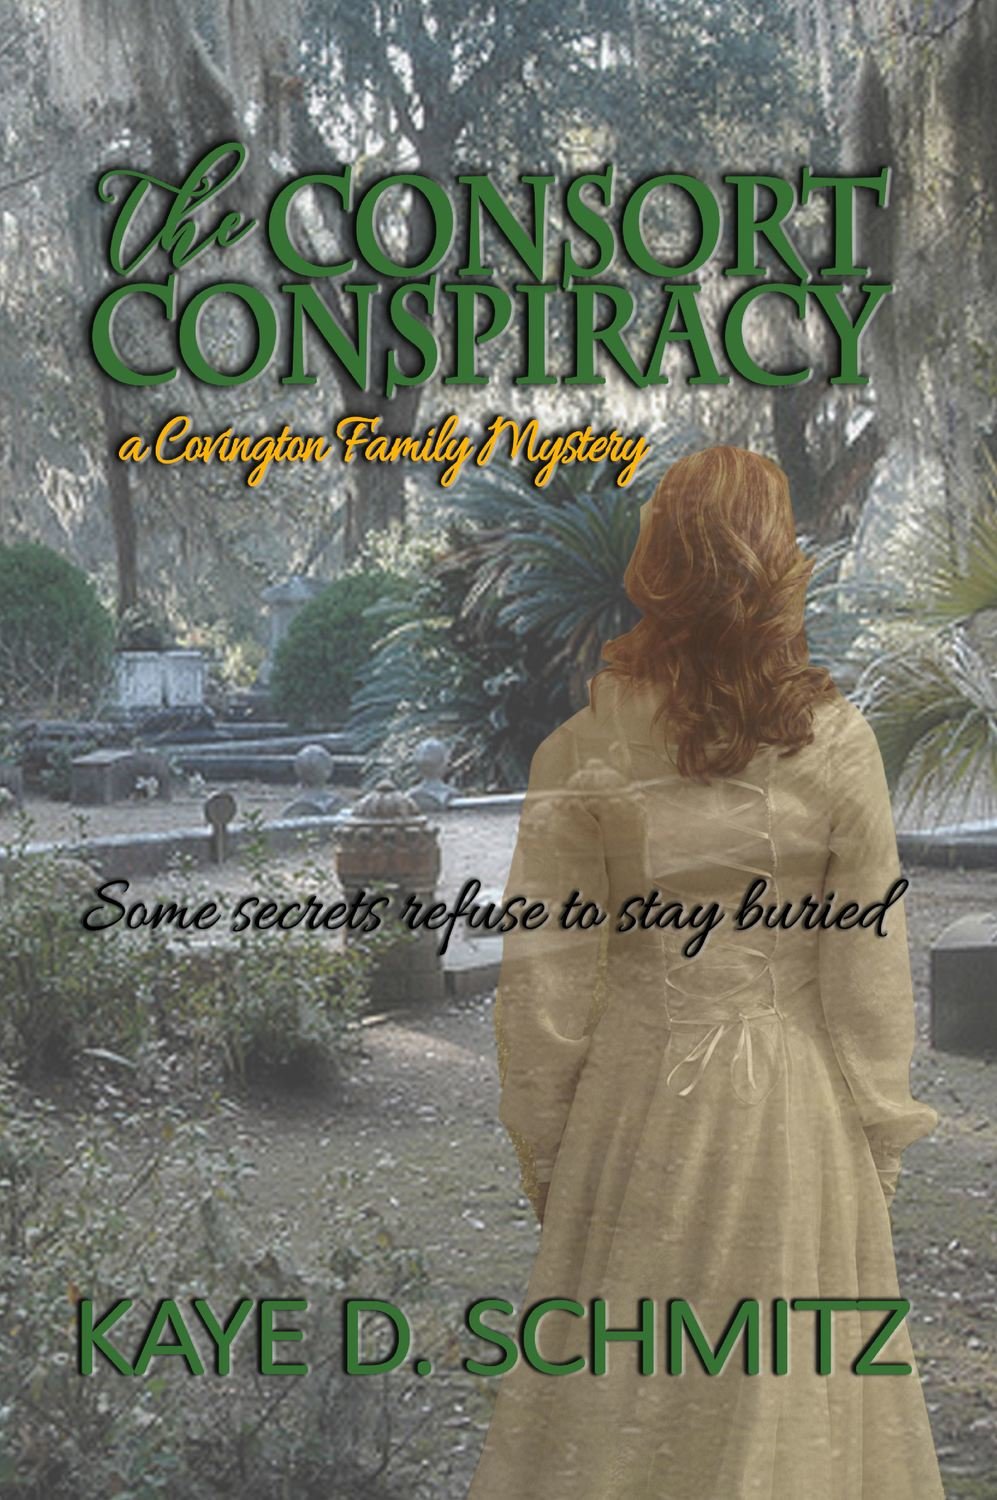 The Consort Conspiracy (A Covington Family Mystery, Book 1) - Available for a limited time